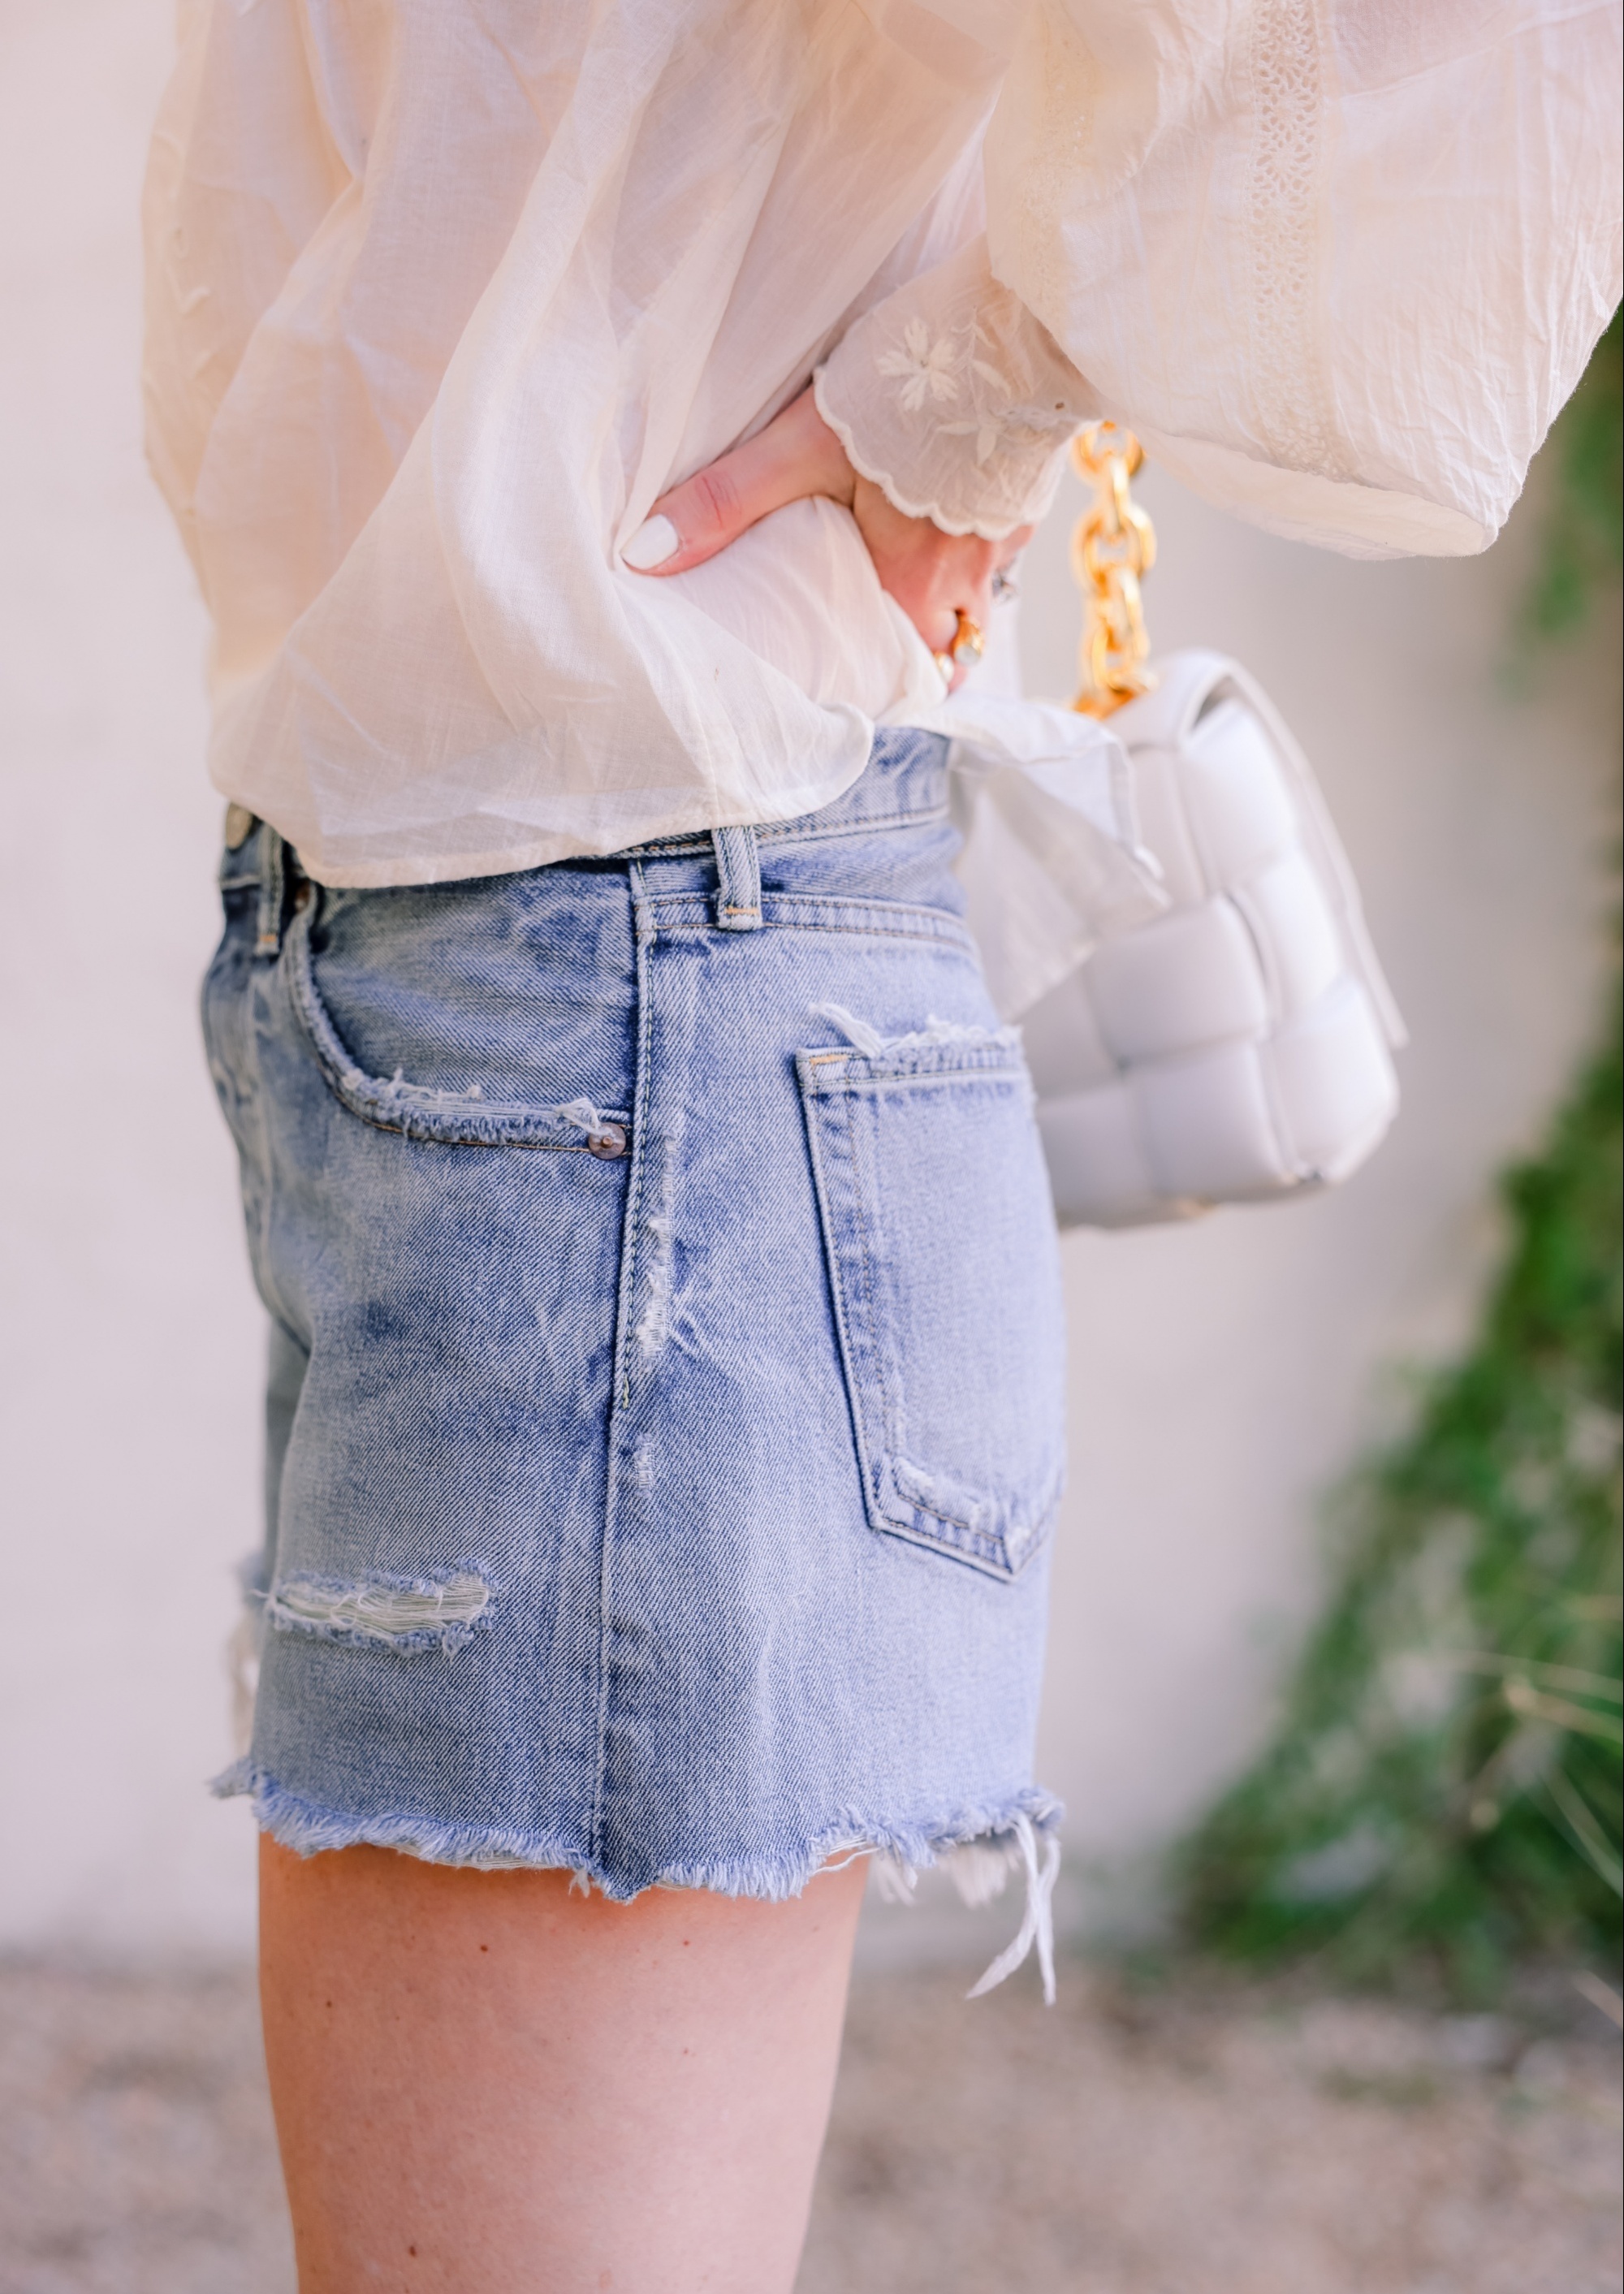 Moussy Vintage denim shorts, Erin Busbee, jean shorts, how should denim shorts fit, shorts for middle aged woman, how to wear shorts over 40, length of shorts womens, shorts inseam guide womens, are my shorts too short, jean shorts outfit, cute shorts, mom shorts outfit, age appropriate denim shorts